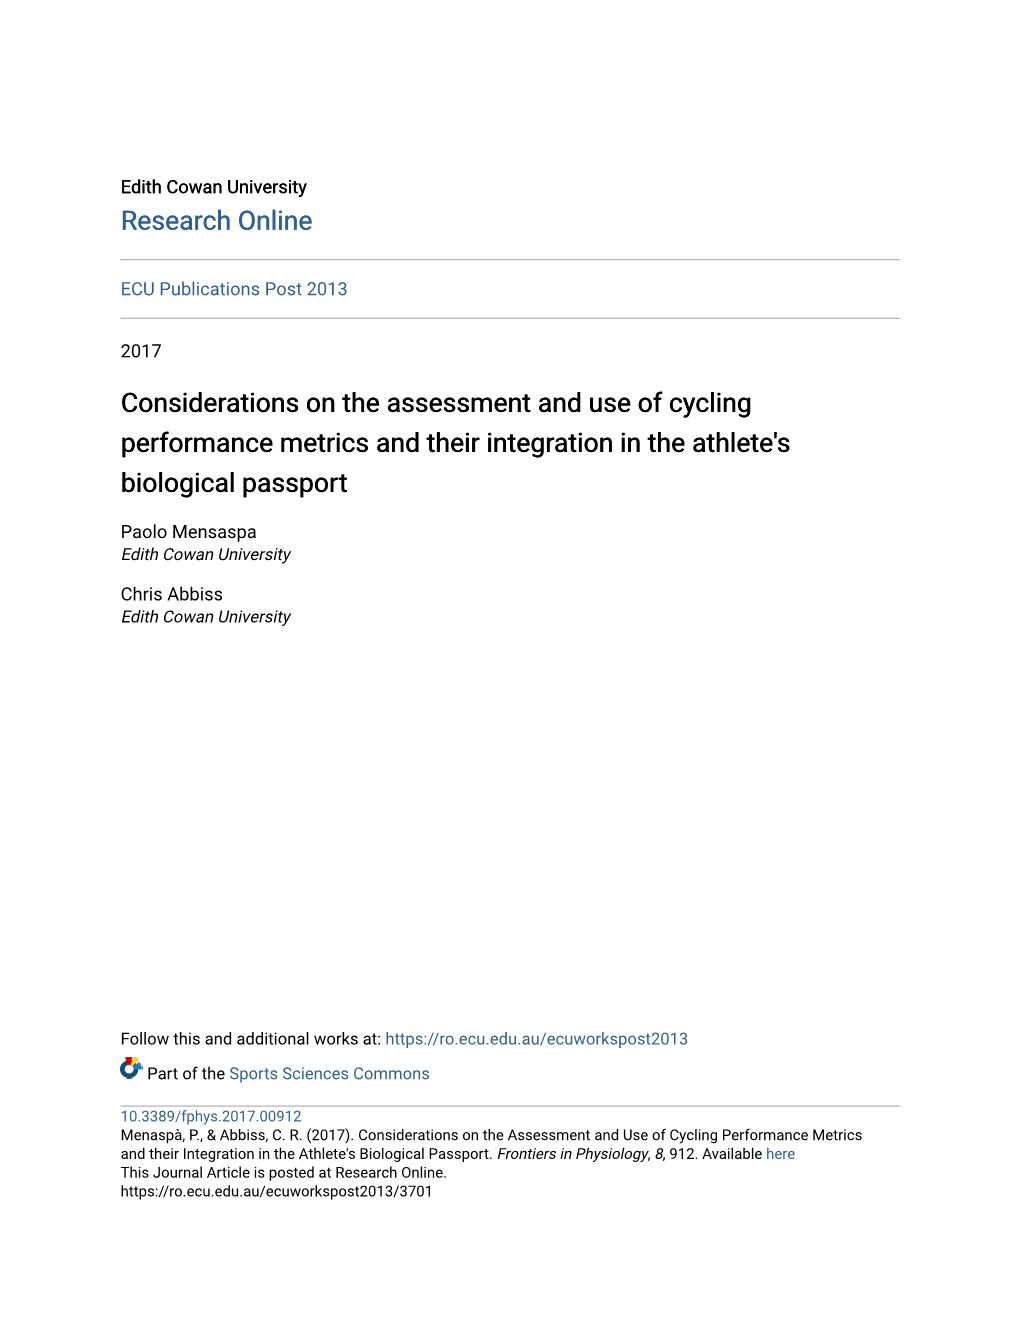 Considerations on the Assessment and Use of Cycling Performance Metrics and Their Integration in the Athlete's Biological Passport